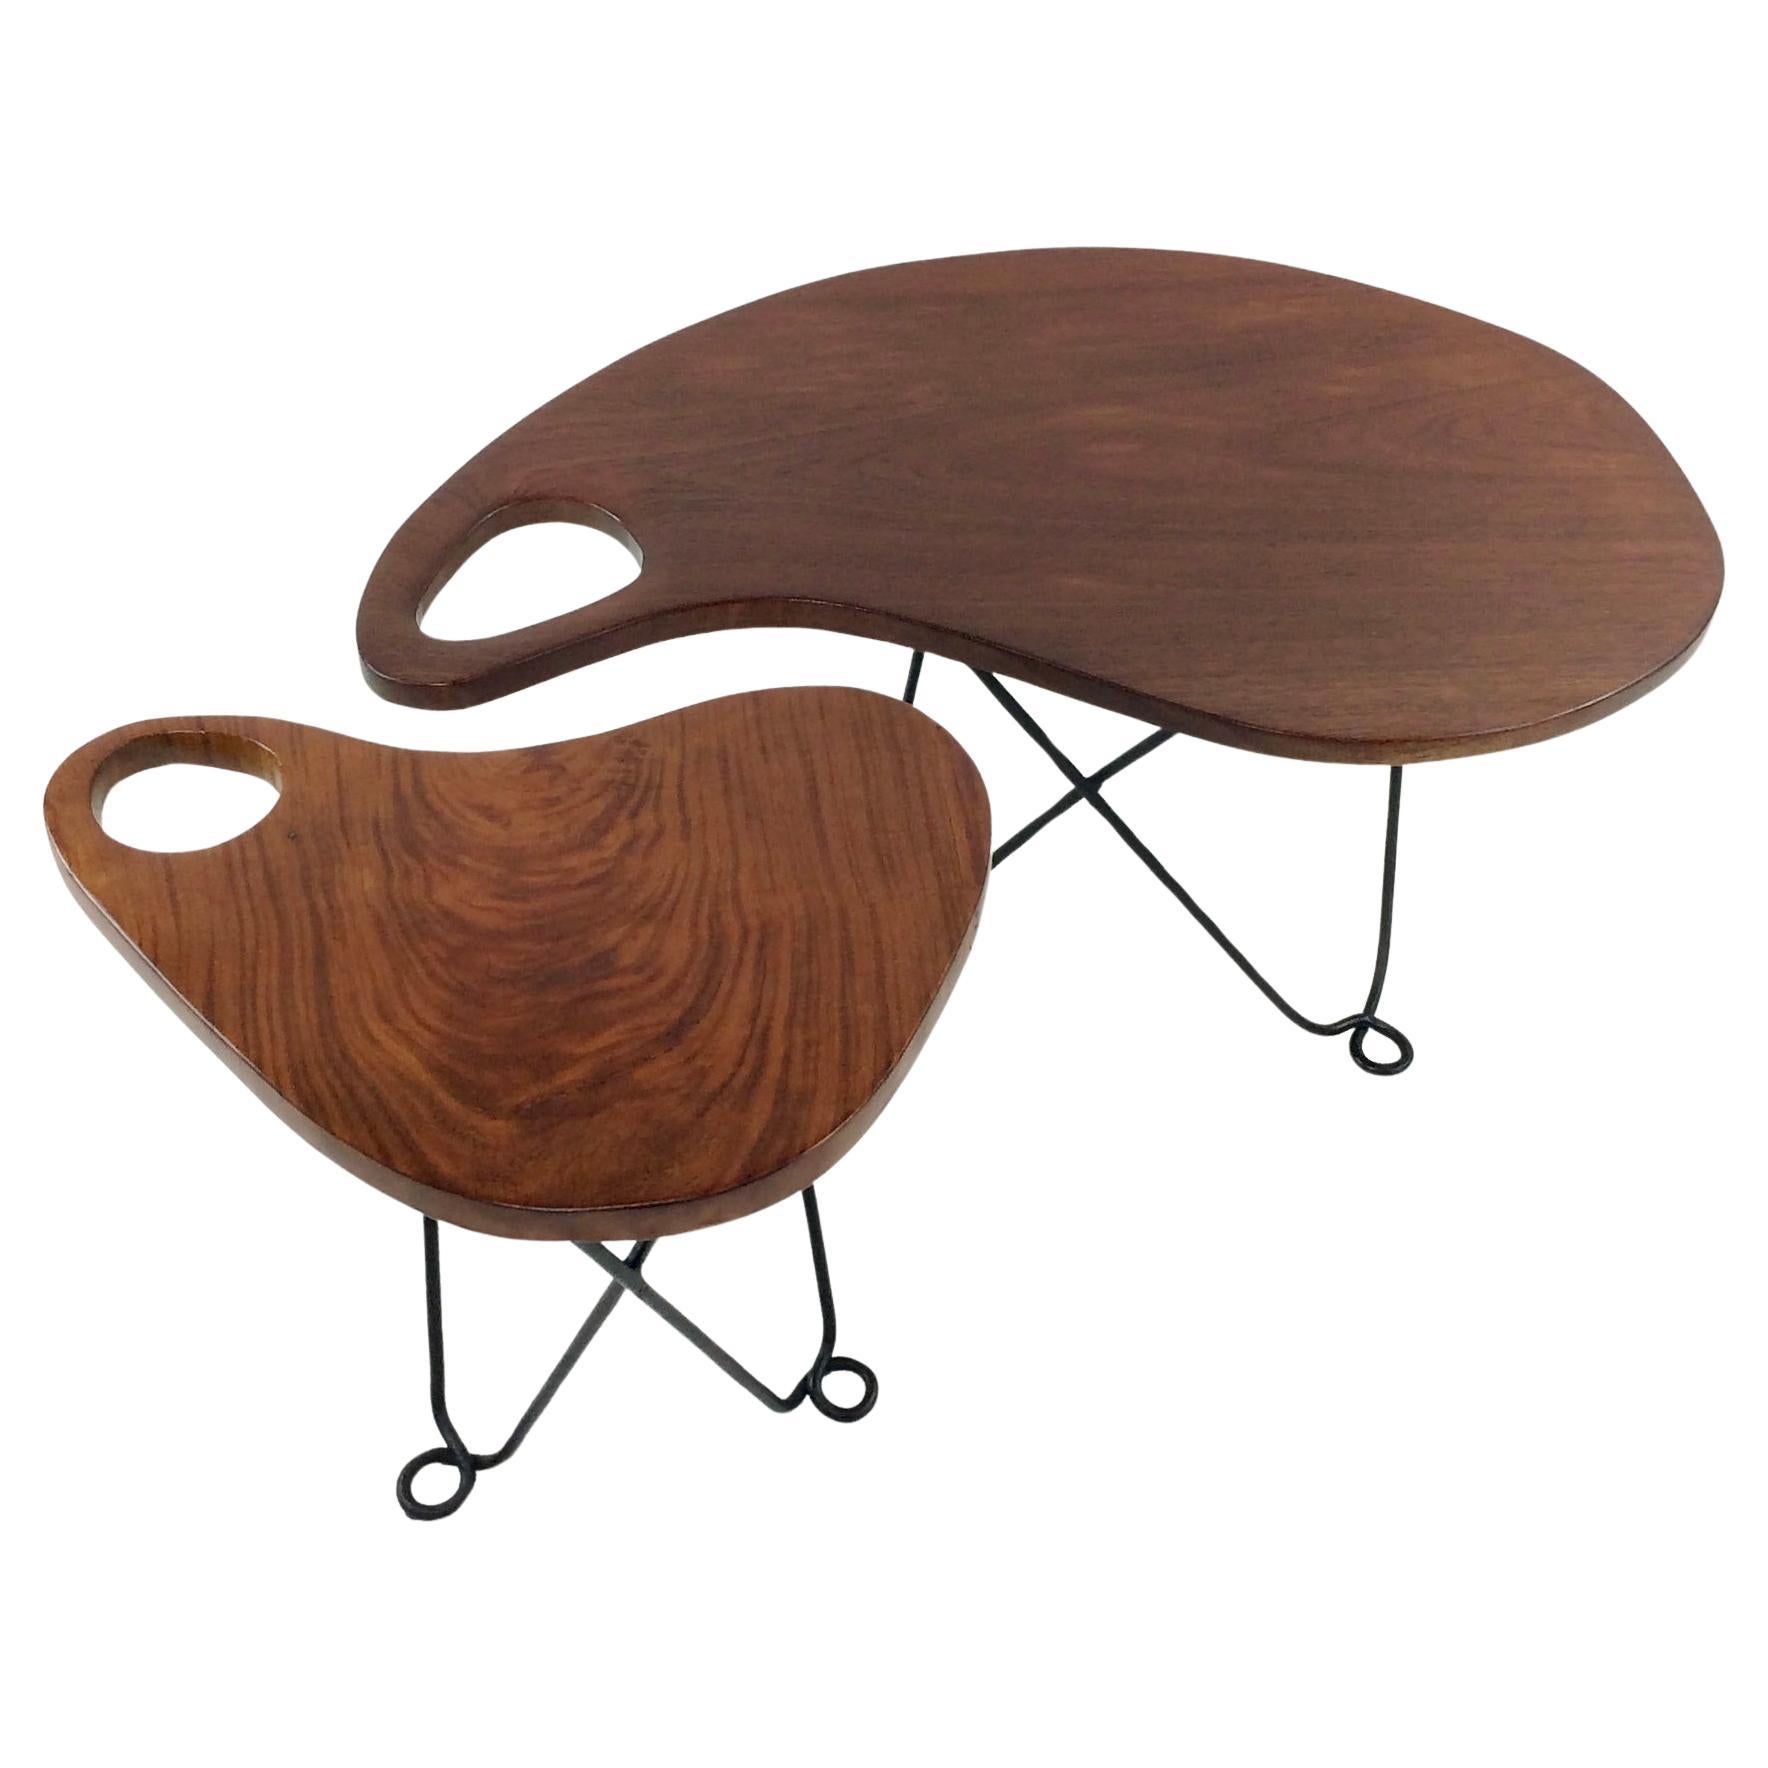 Jeanette Laverriere Attributed Pair of Coffee Tables, circa 1940, France For Sale